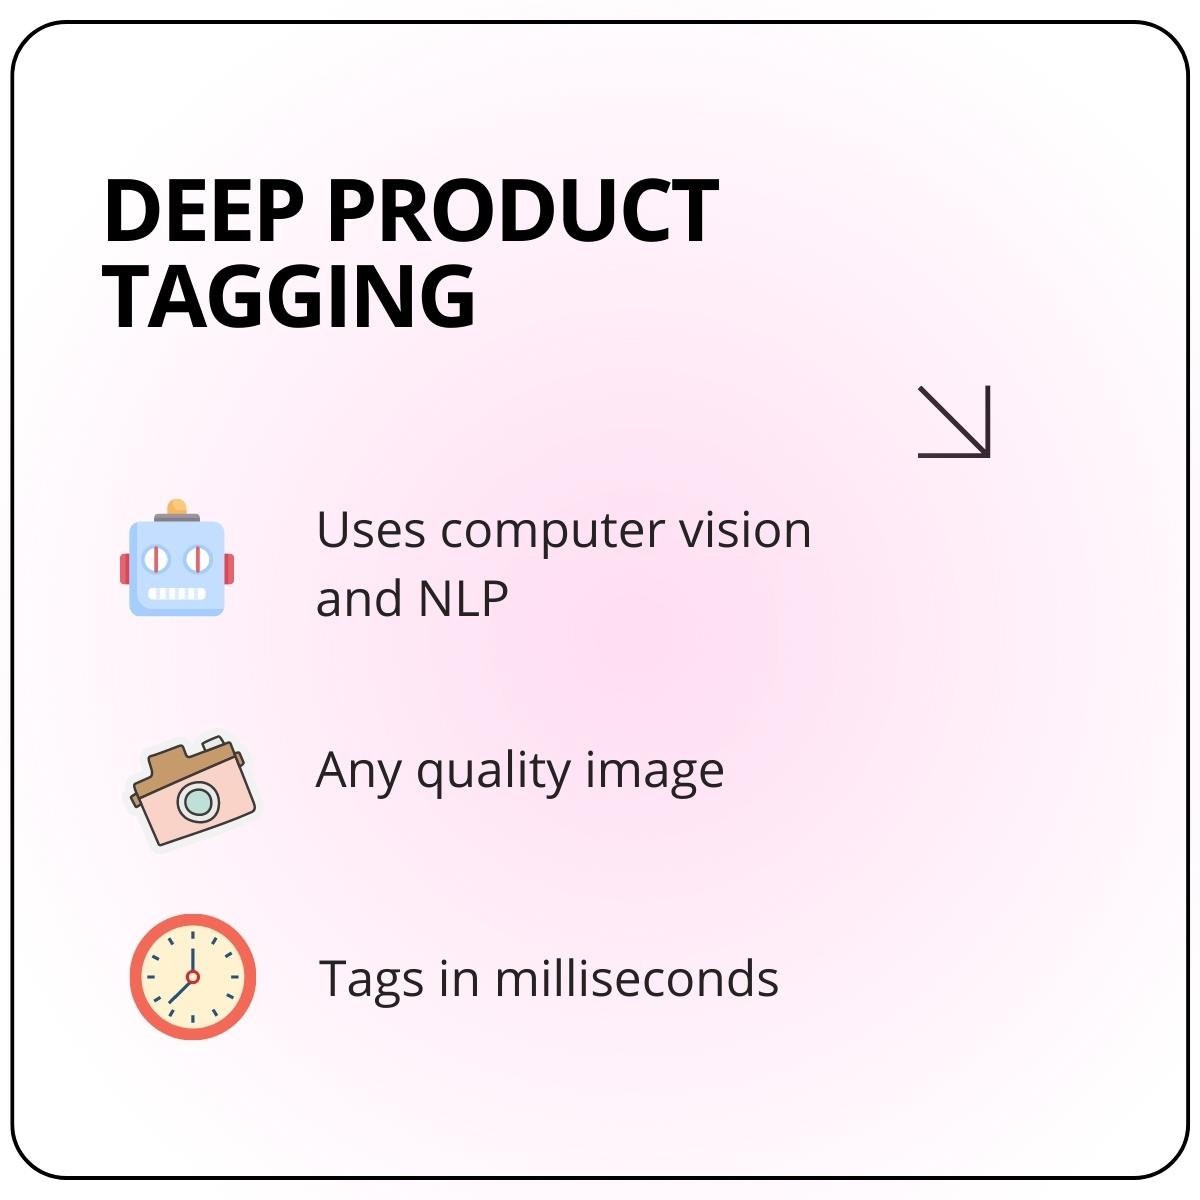 Deep product tagging features against gradient background